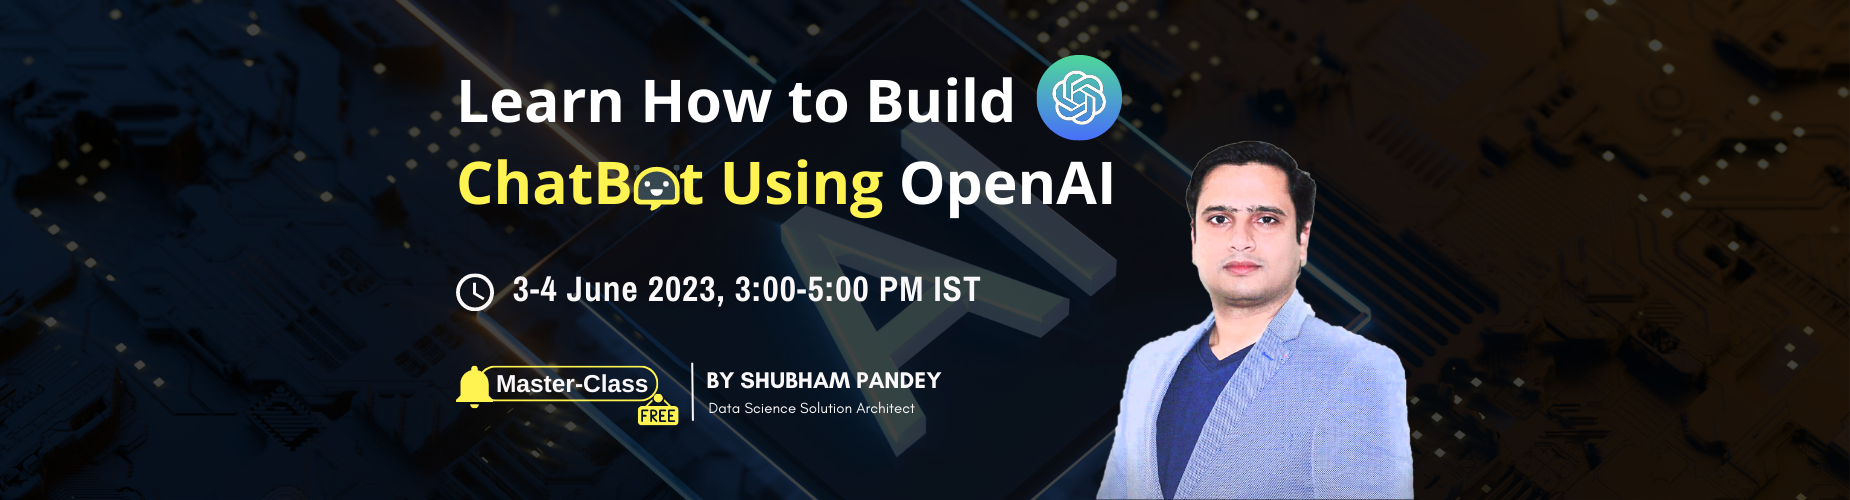 Learn How to Build ChatBot Using OpenAI